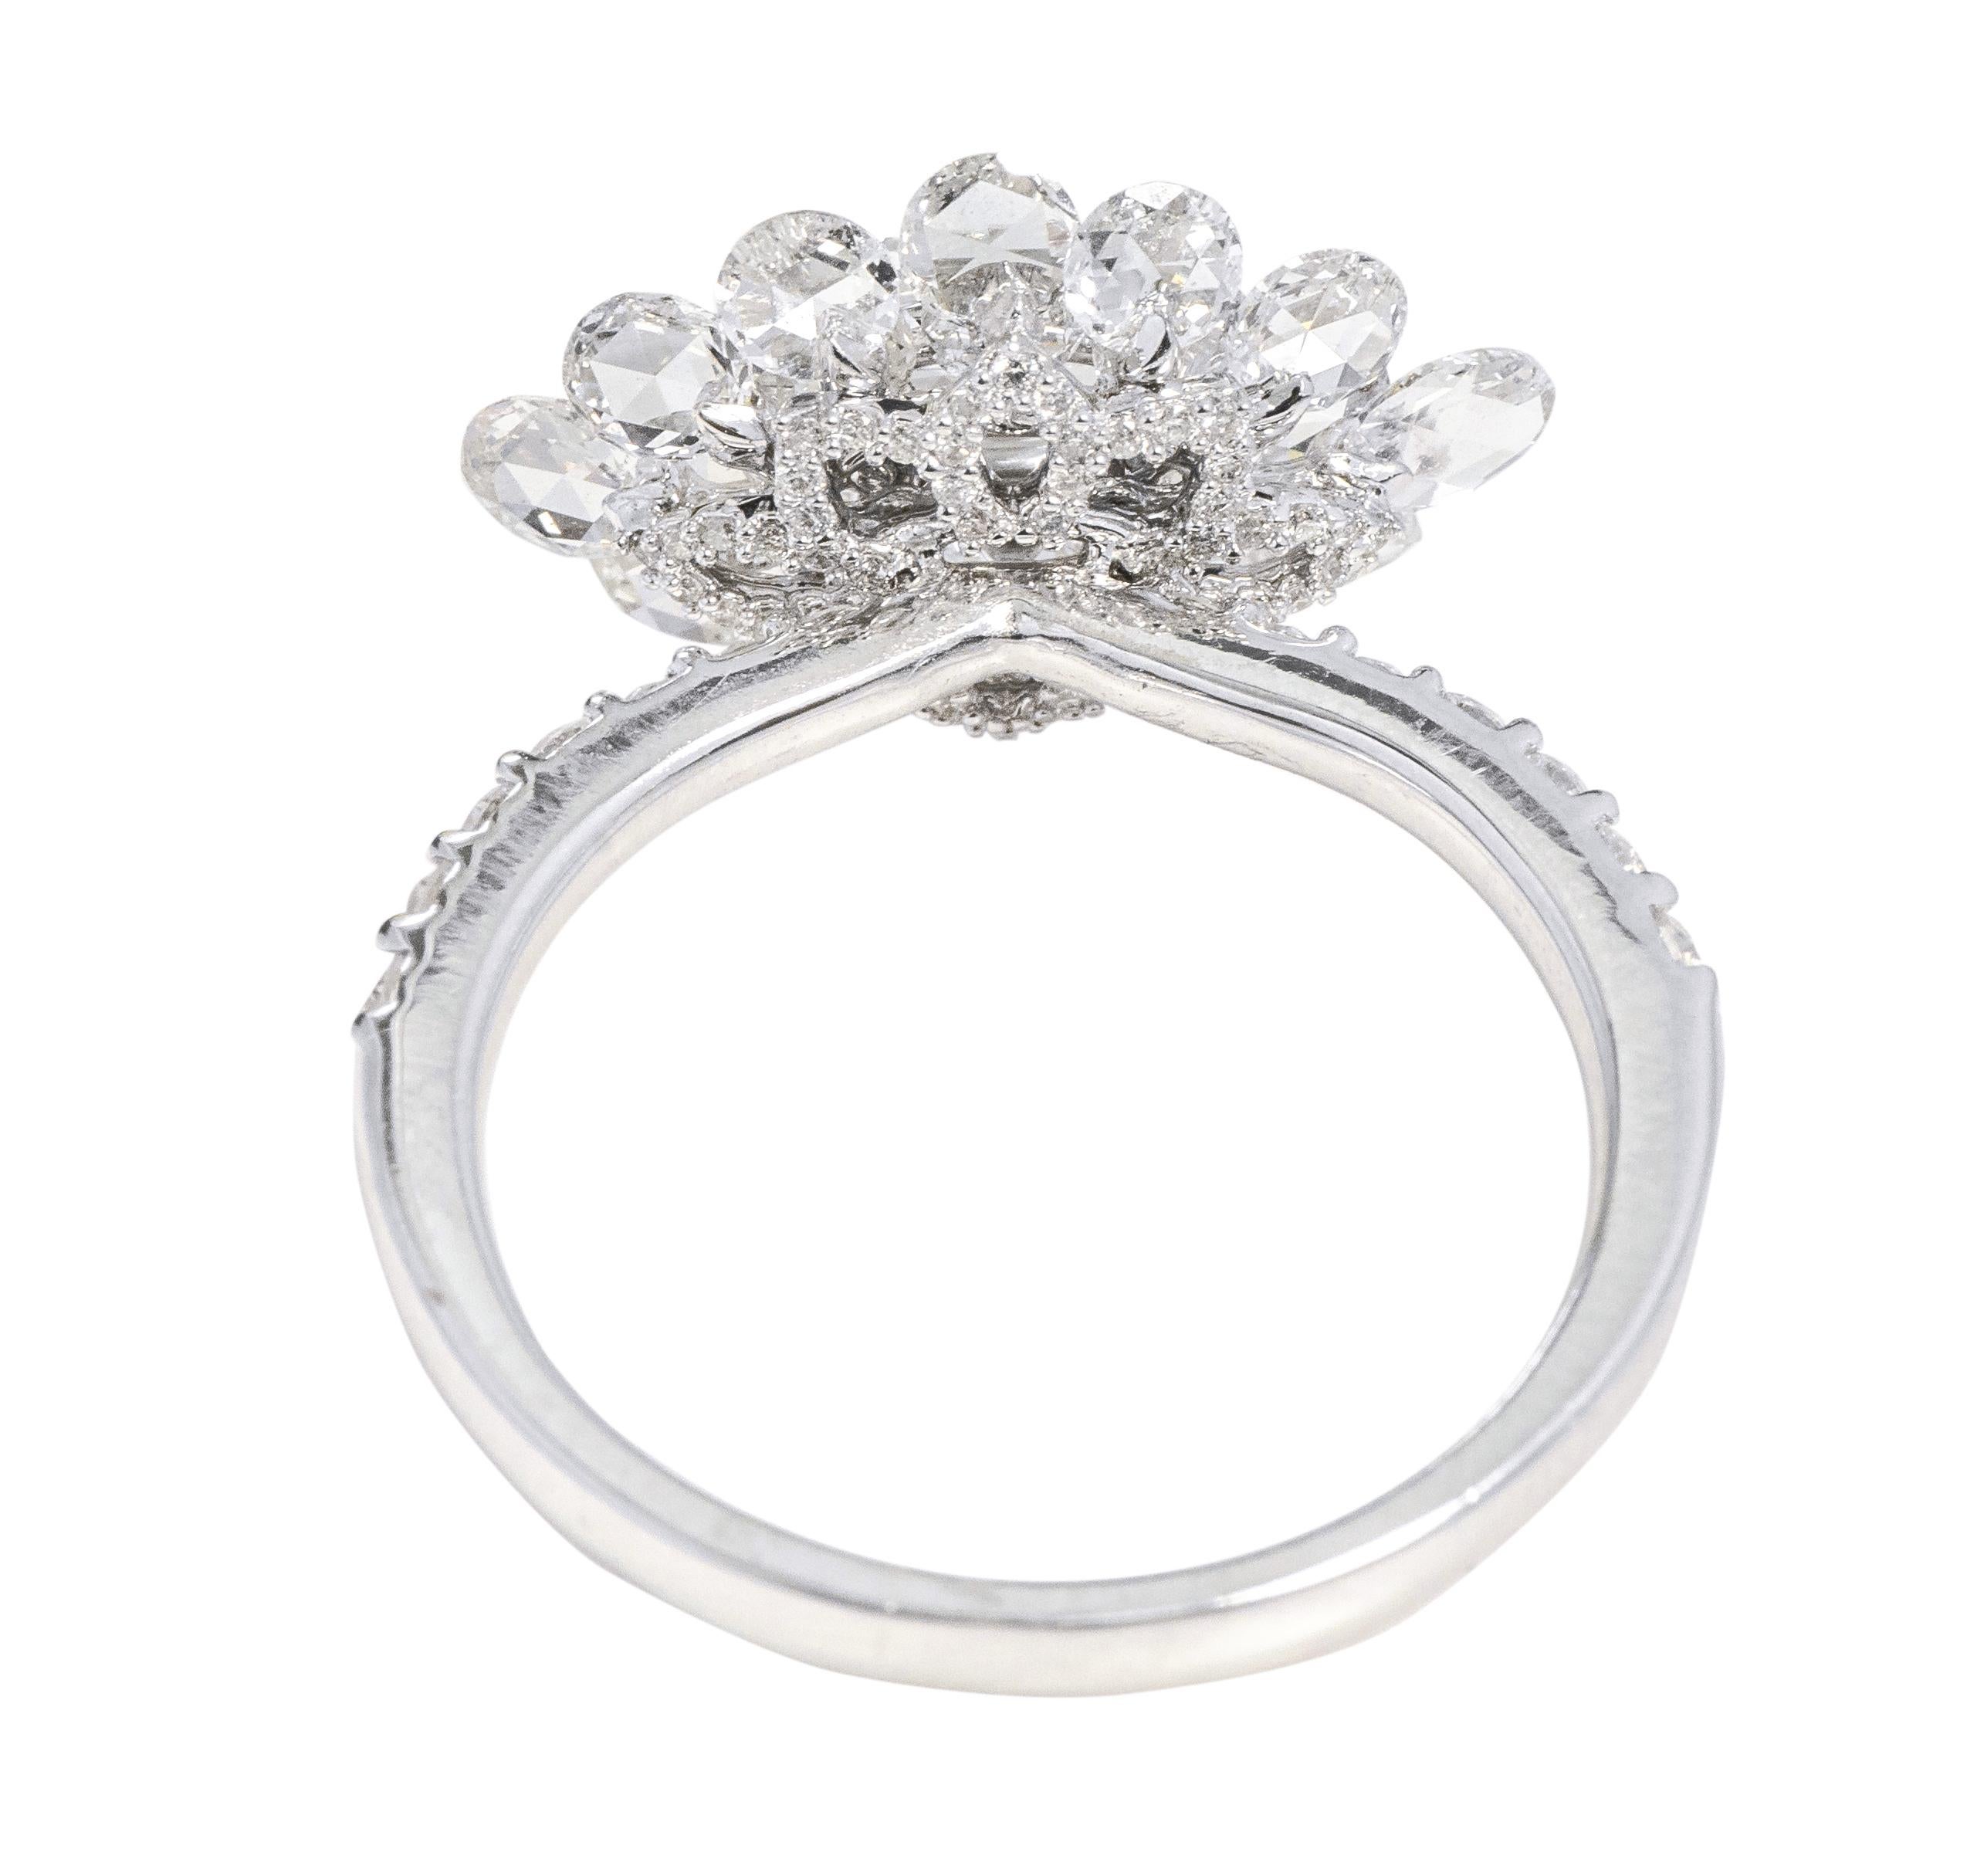 18 Karat White Gold 2.55 Carat Rose-Cut and Full-Cut Diamond Bridal Ring

This impeccable cocktail diamond rose-cut solitaire ring is a prolific design. The ring sets itself apart with the exquisite oval shape rose-cut solitaire diamonds surrounded